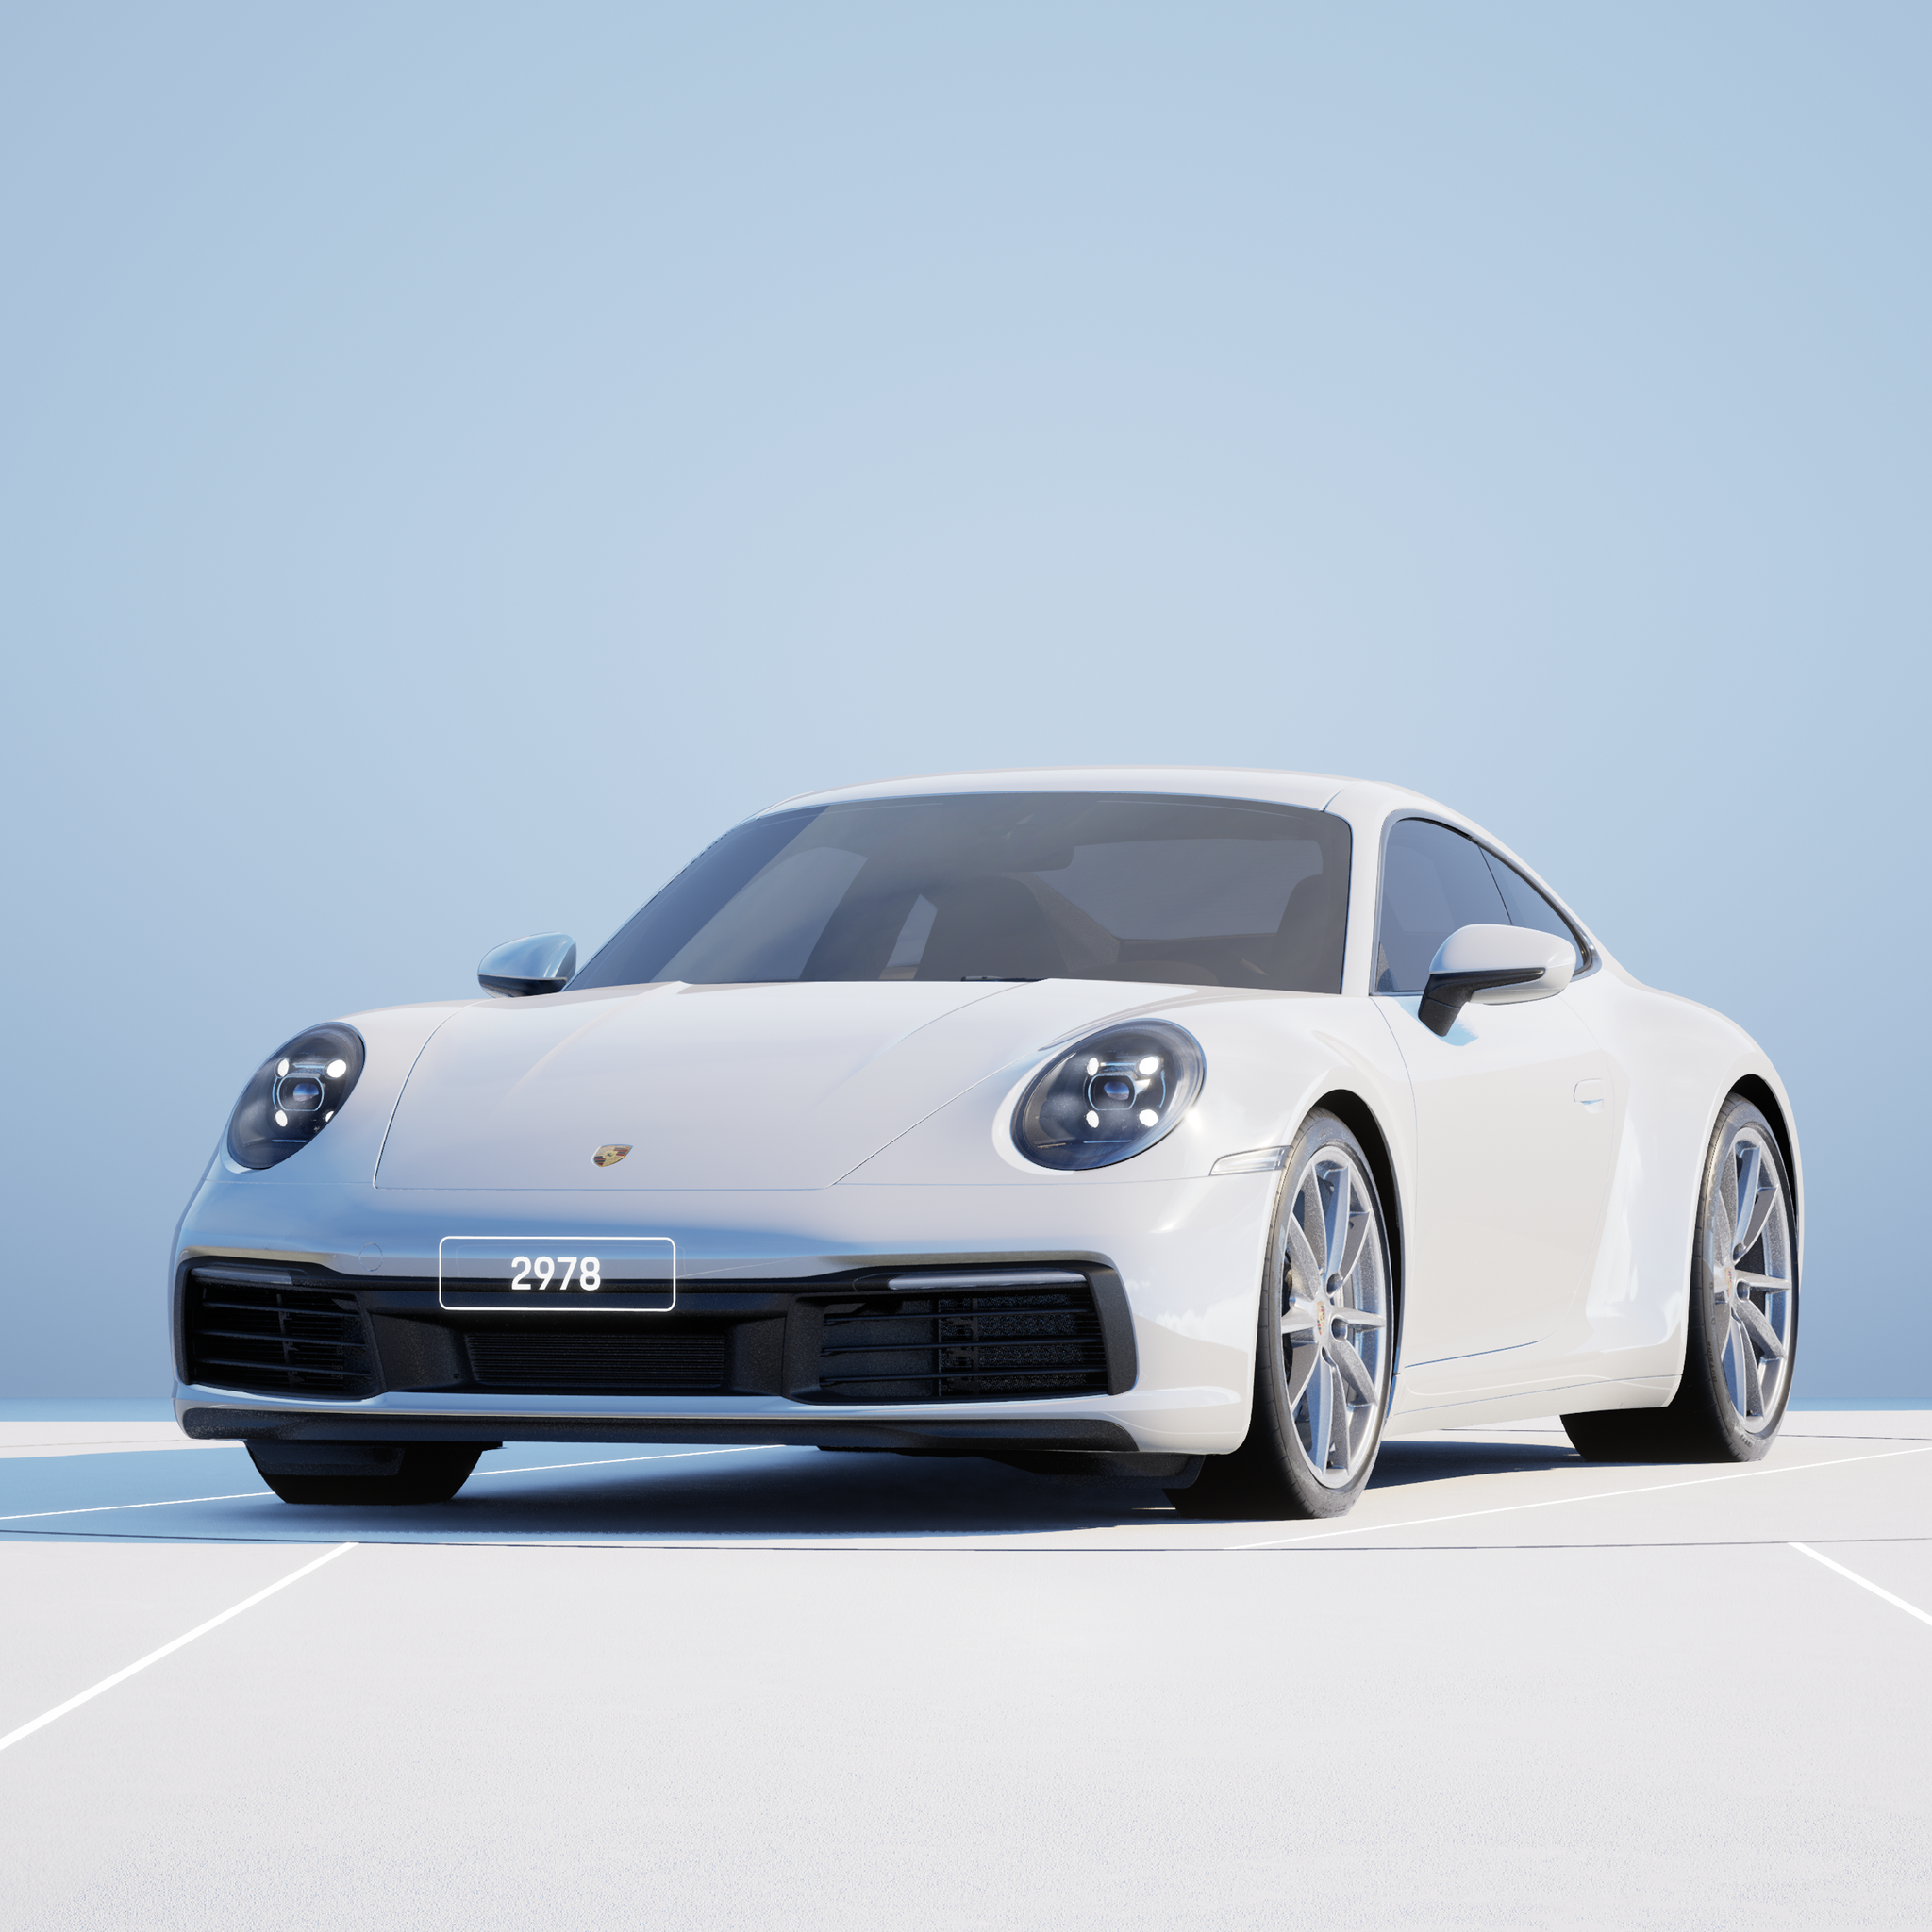 The PORSCHΞ 911 2978 image in phase